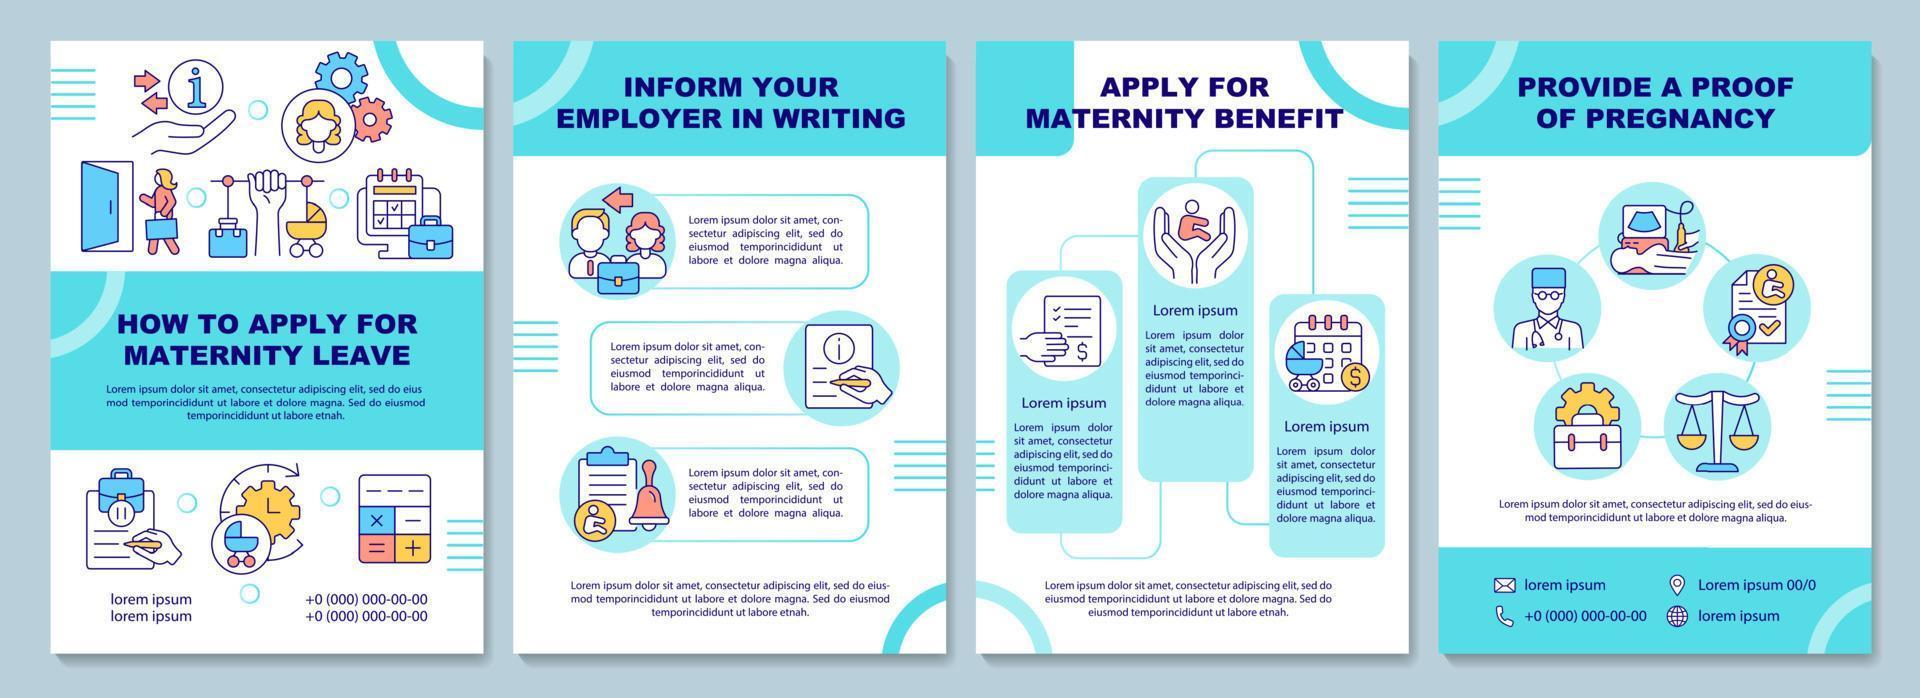 How to apply for maternity leave brochure template vector